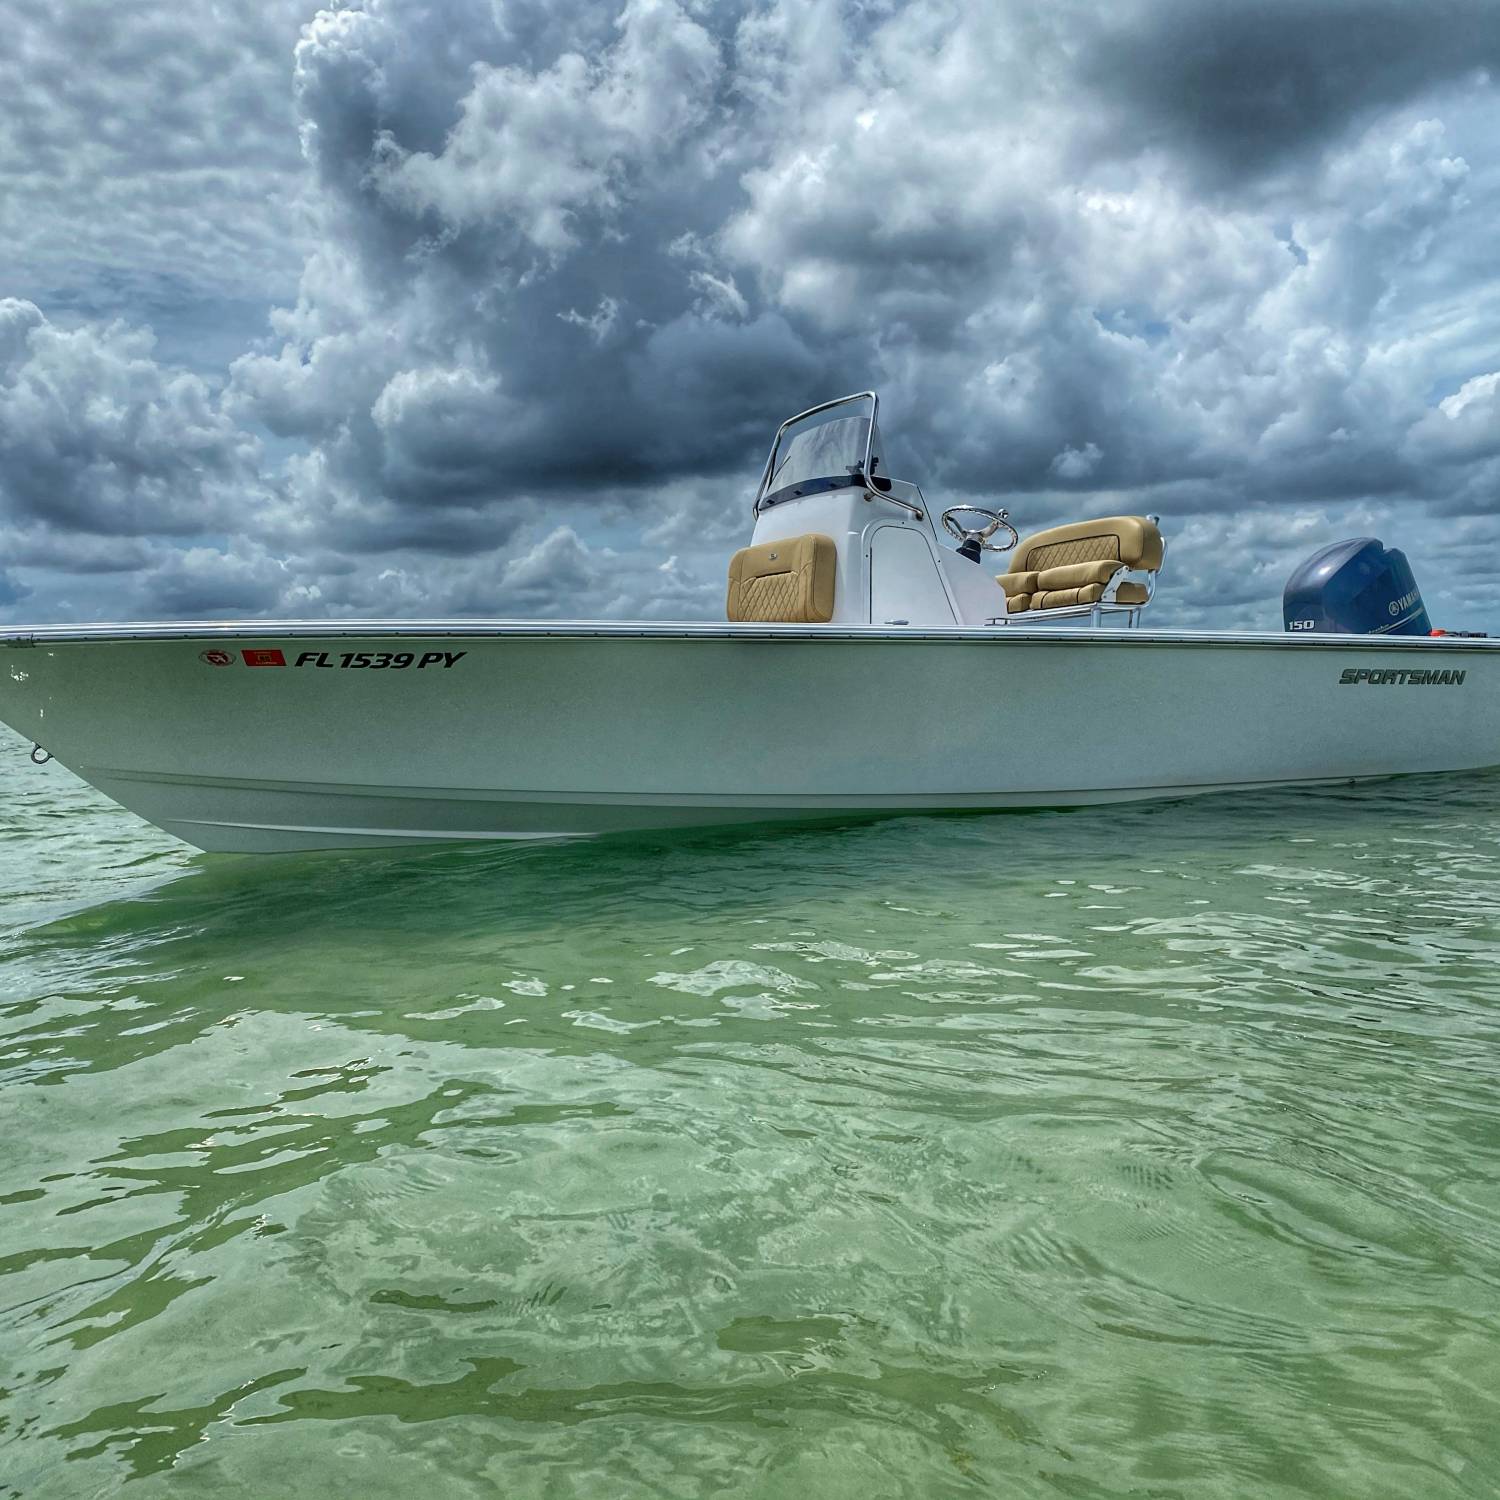 Title: Sandbar s - On board their Sportsman Masters 227 Bay Boat - Location: Clearwater beach. Participating in the Photo Contest #SportsmanAugust2021